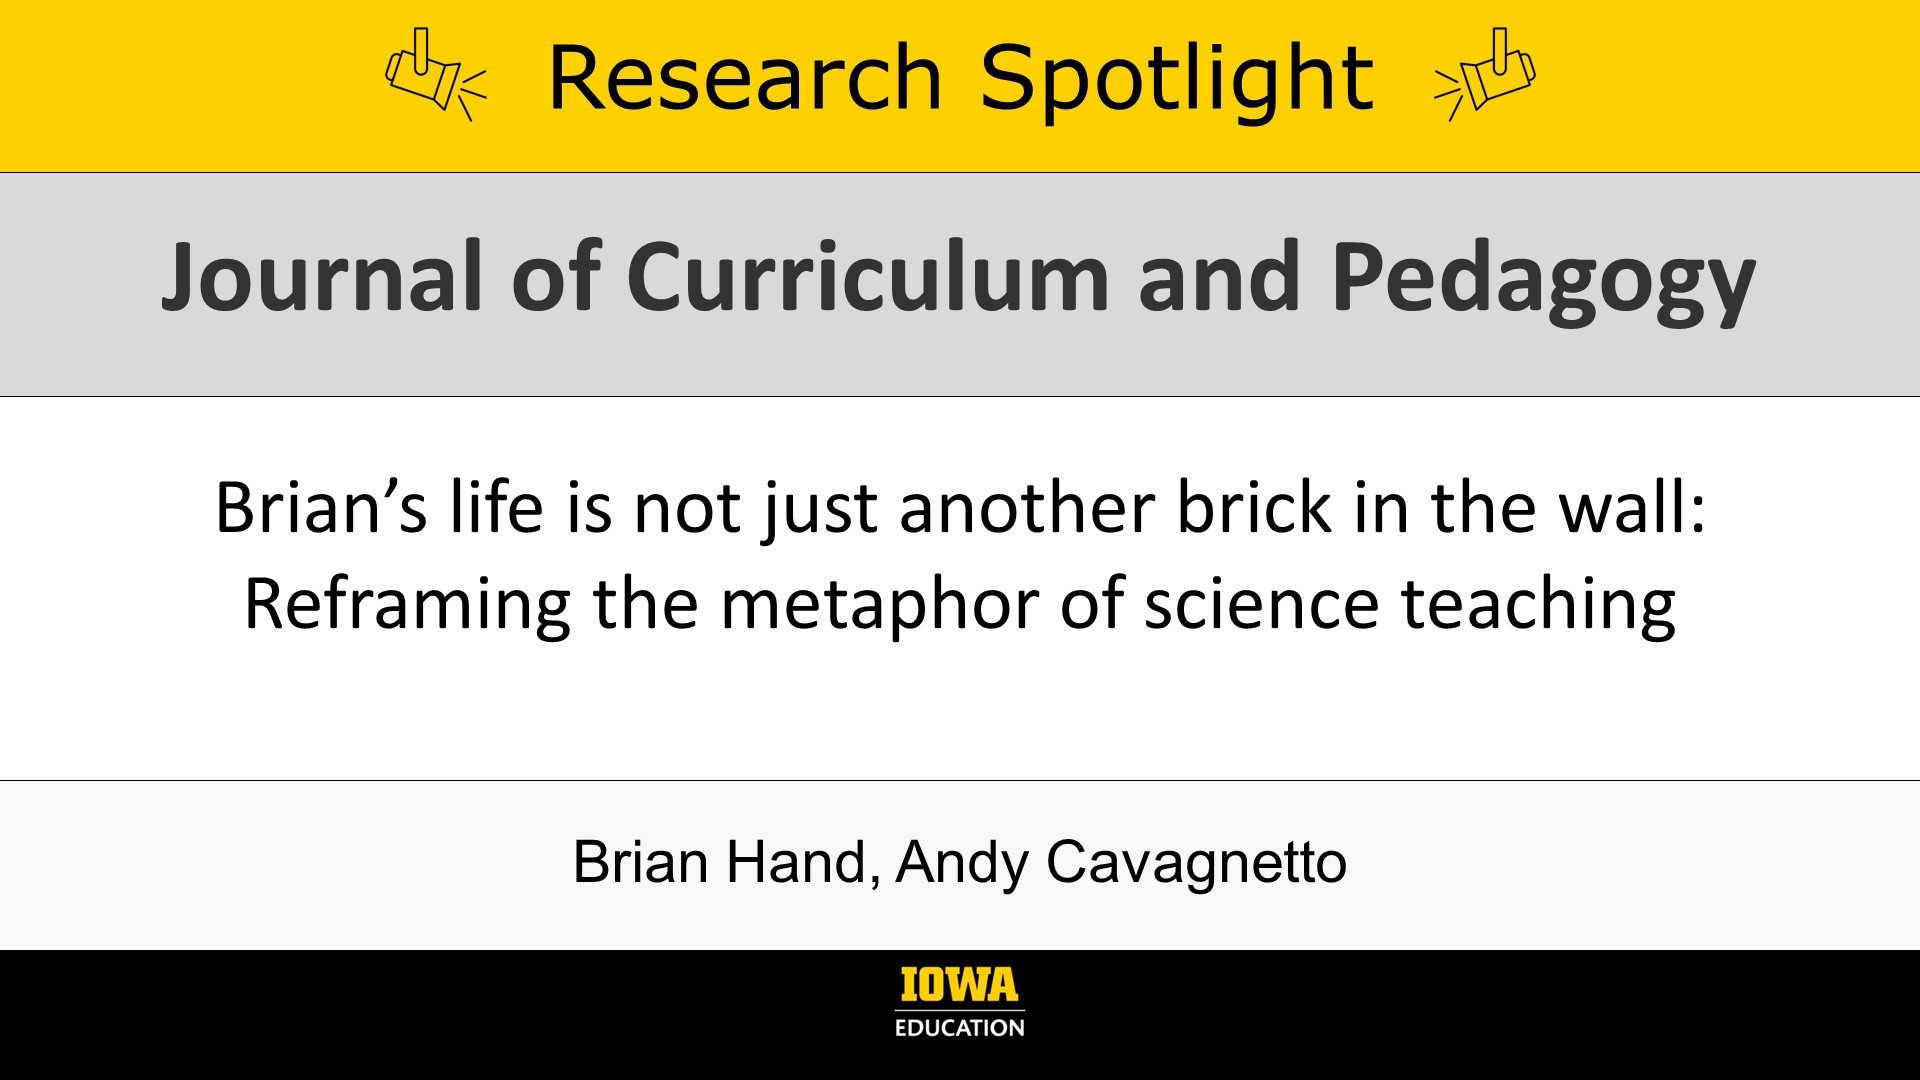 Research Spotlight: Brian’s life is not just another brick in the wall: Reframing the metaphor of science teaching. In Journal of Curriculum and Pedagogy